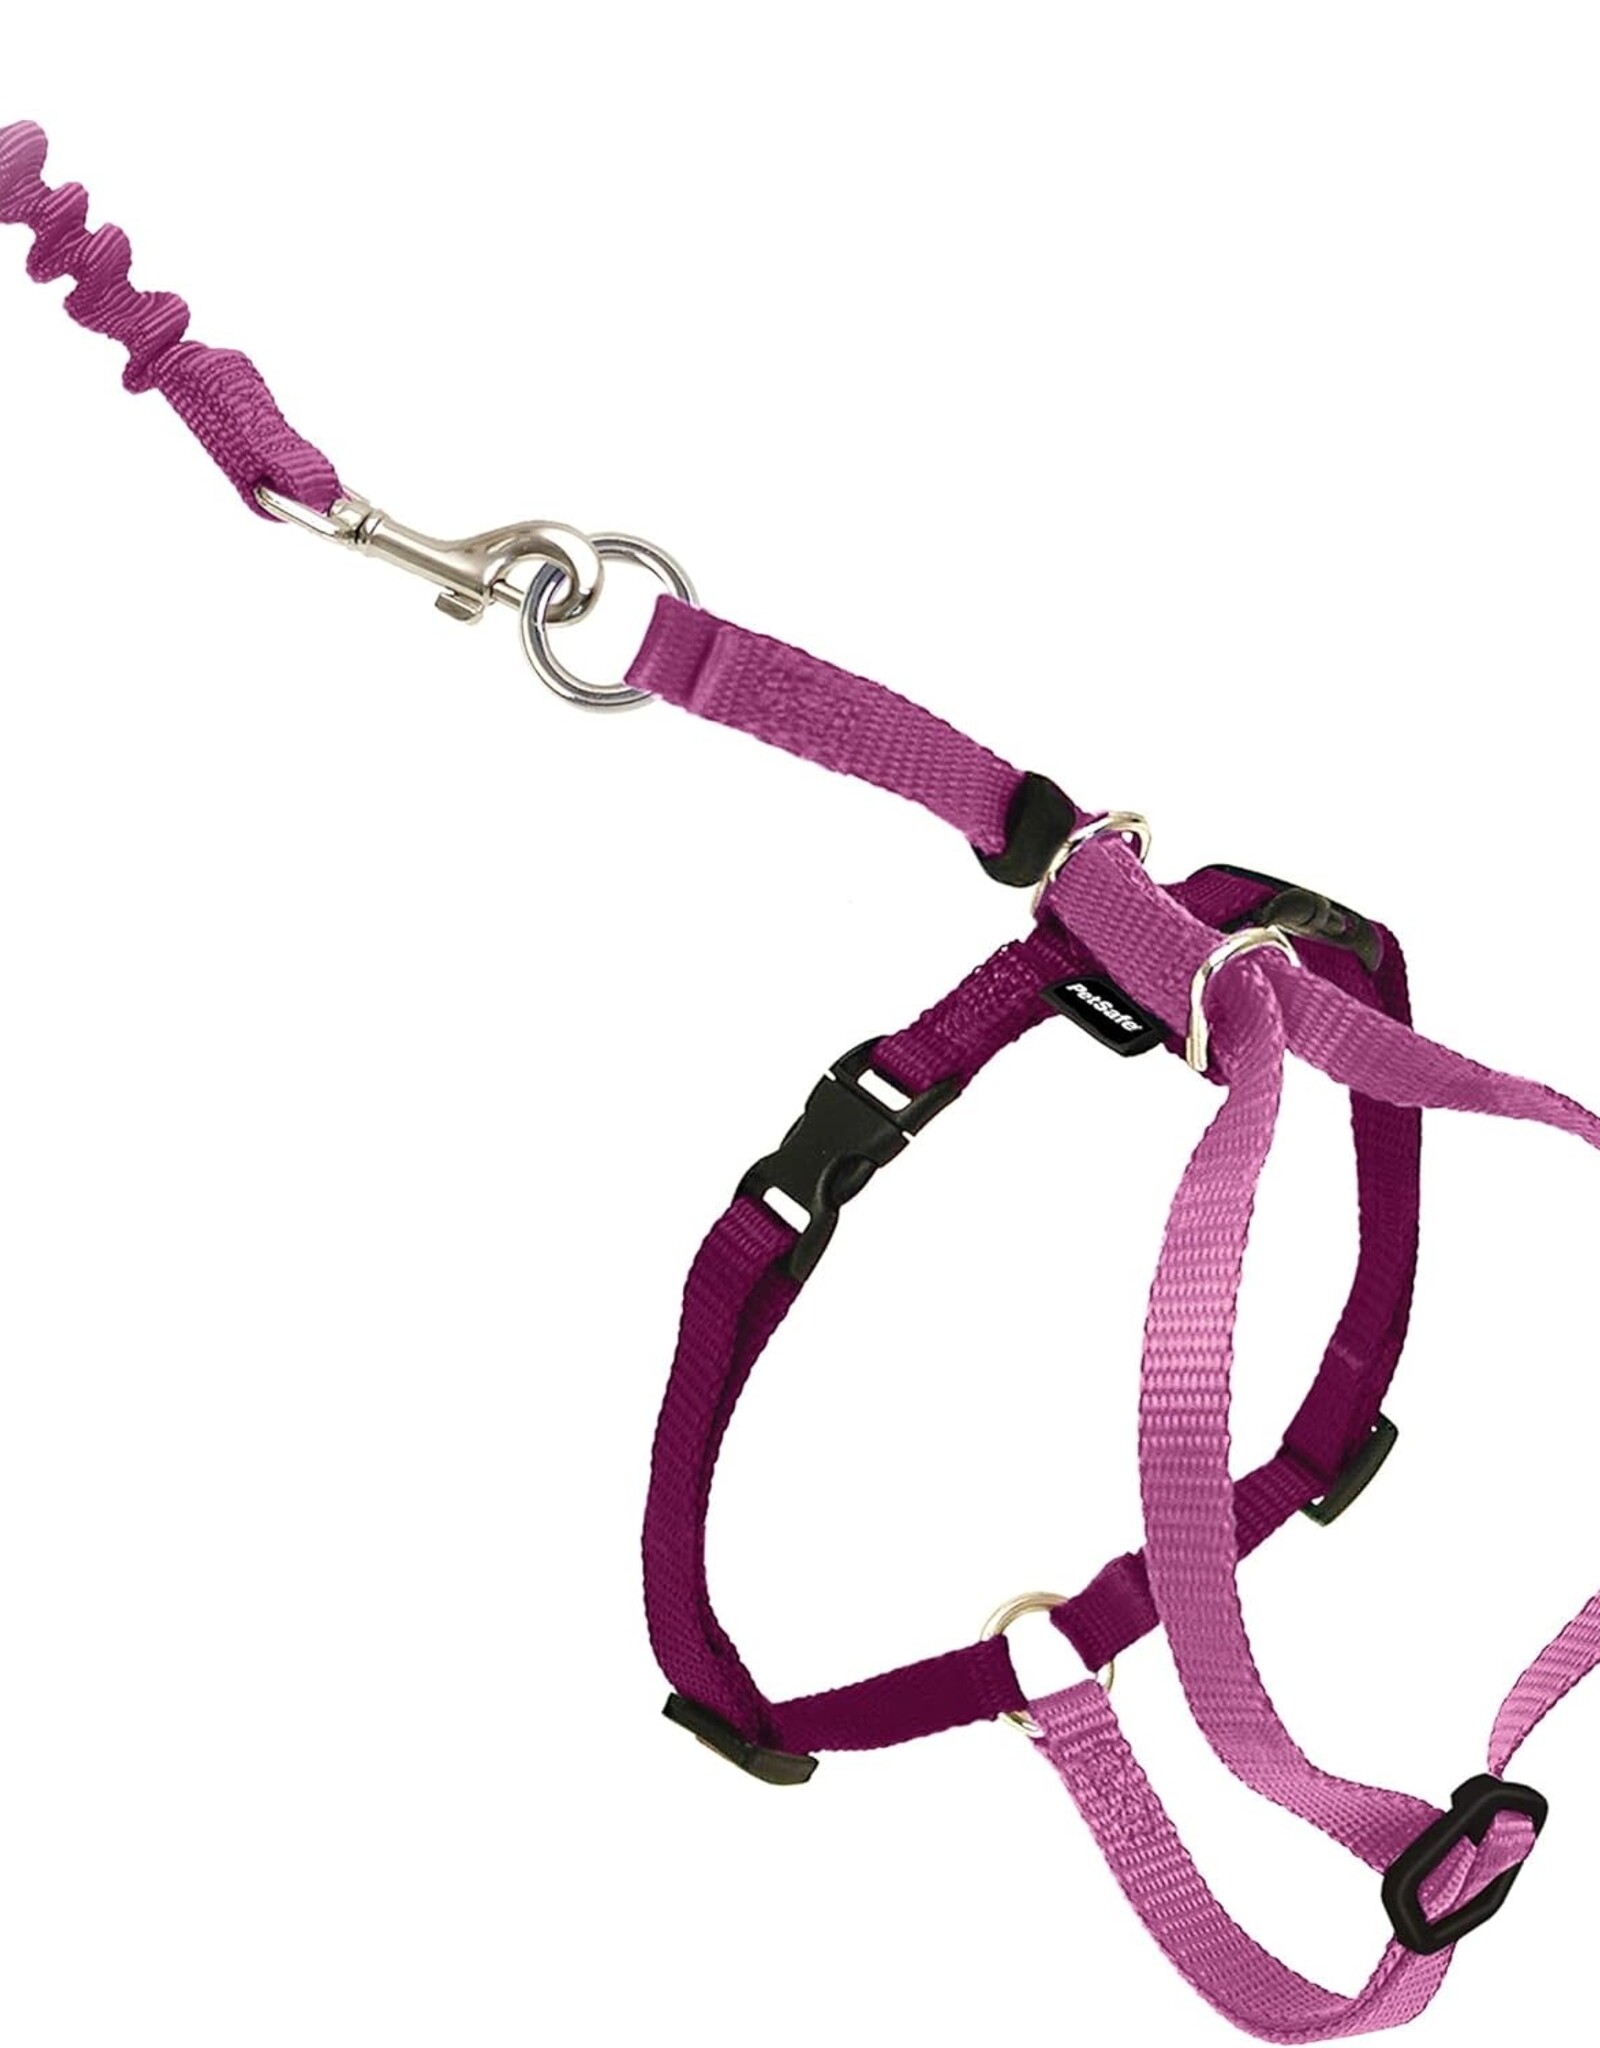 RADIO SYSTEMS CORP(PET SAFE) Come With Me Kitty Harness & Bungee Leash Medium Dusty Rose